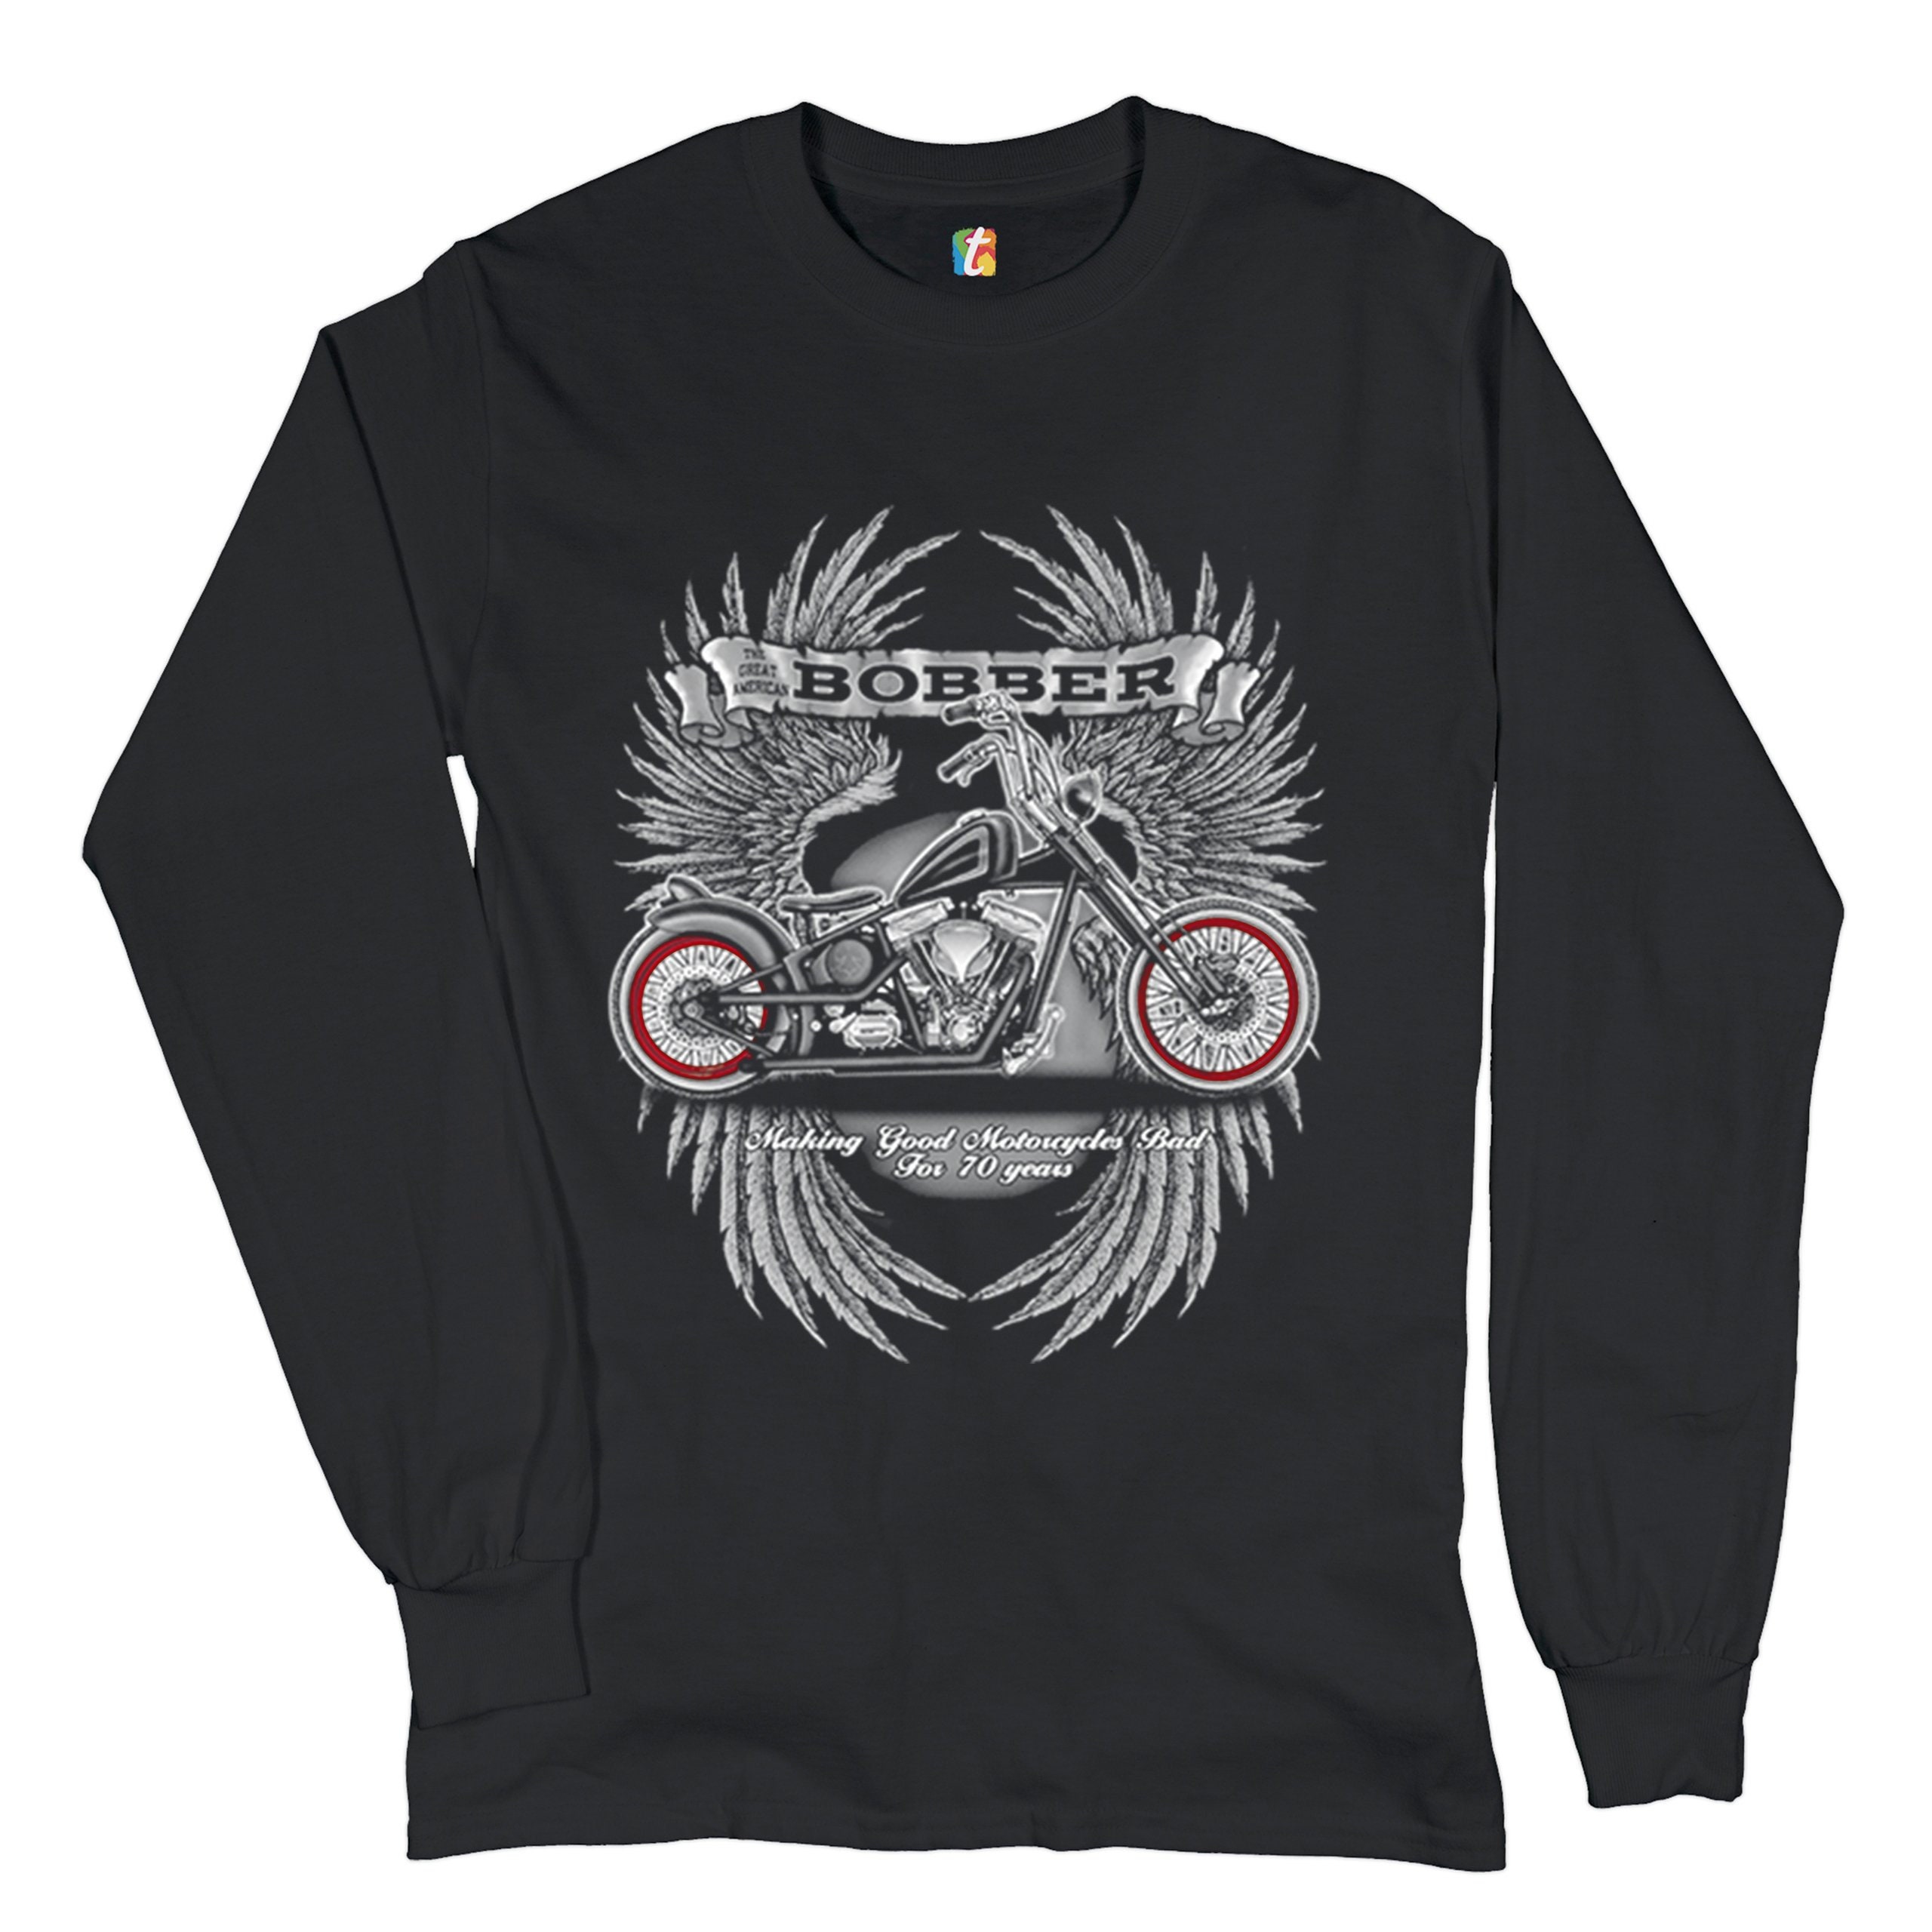 The Great American Bobber Long Sleeve T-shirt Motorcycle